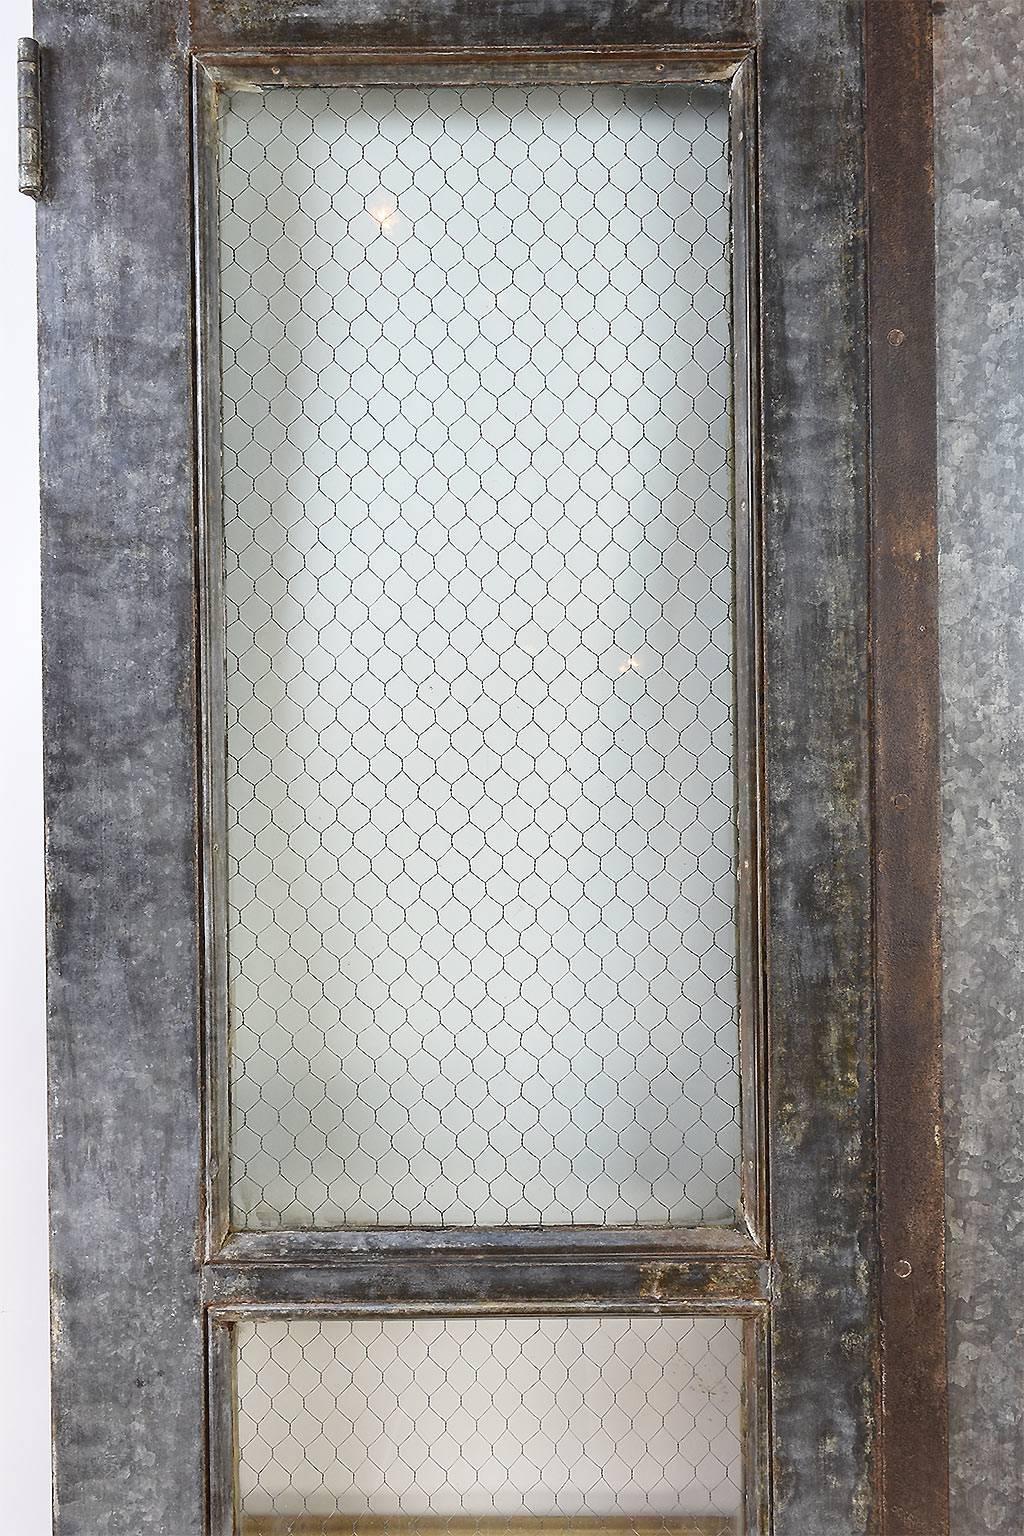 Saved from a school in eastern Ohio, this set of double doors is the epitome of the 'Industrial door.' Clad in galvanized tin, each door has chicken wire glass making up the full-view windows. Additionally, made in 1910, the doors are complete with